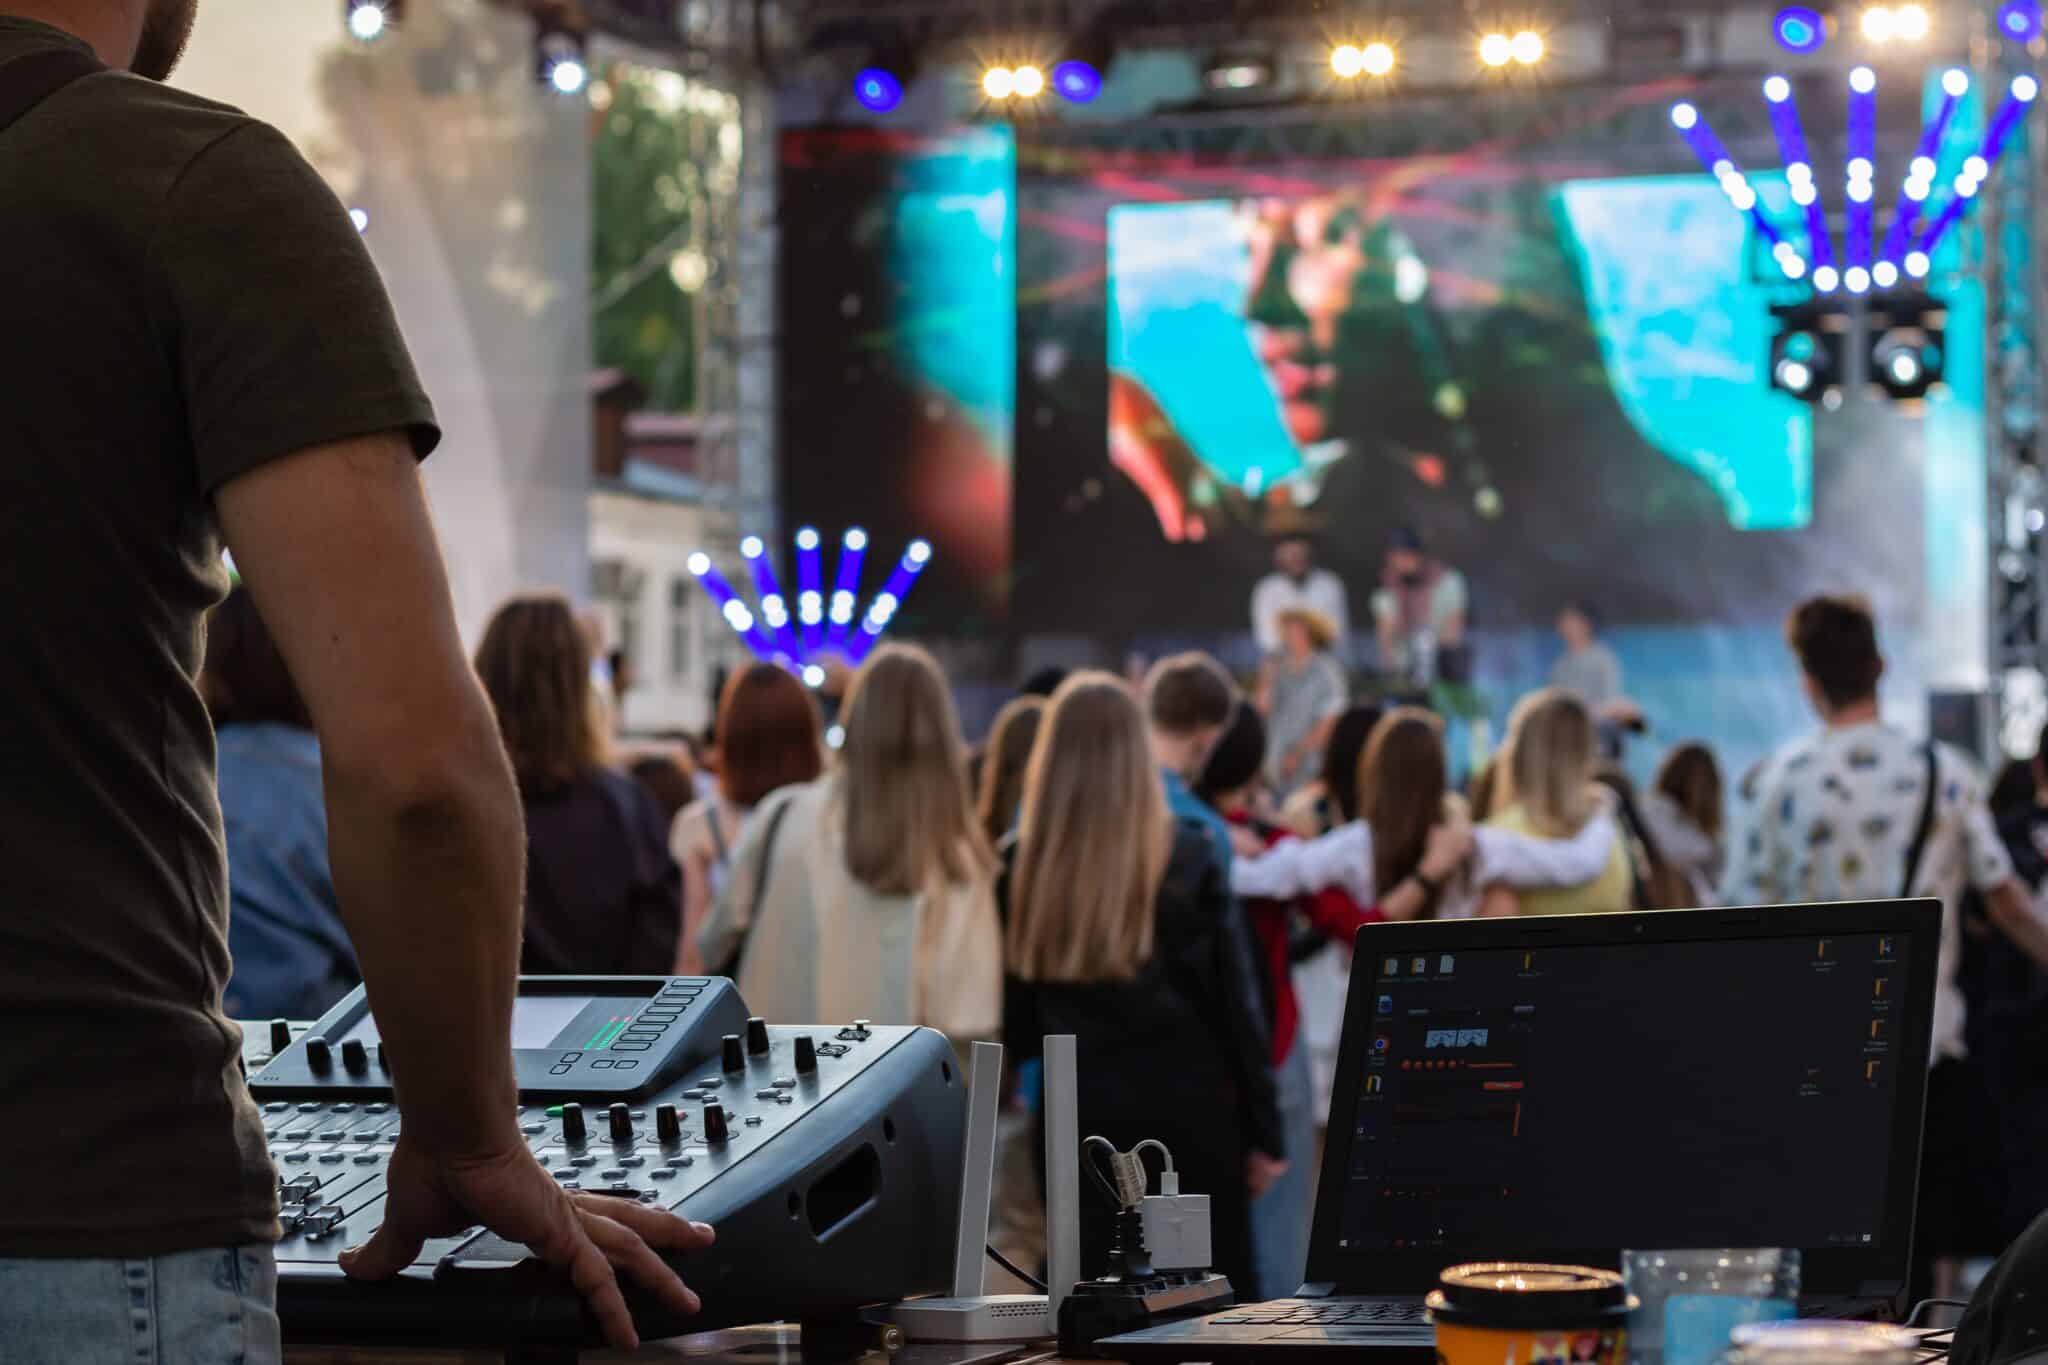 low light, professional DJ music mixer, laptop at party festival with crowd of people in background